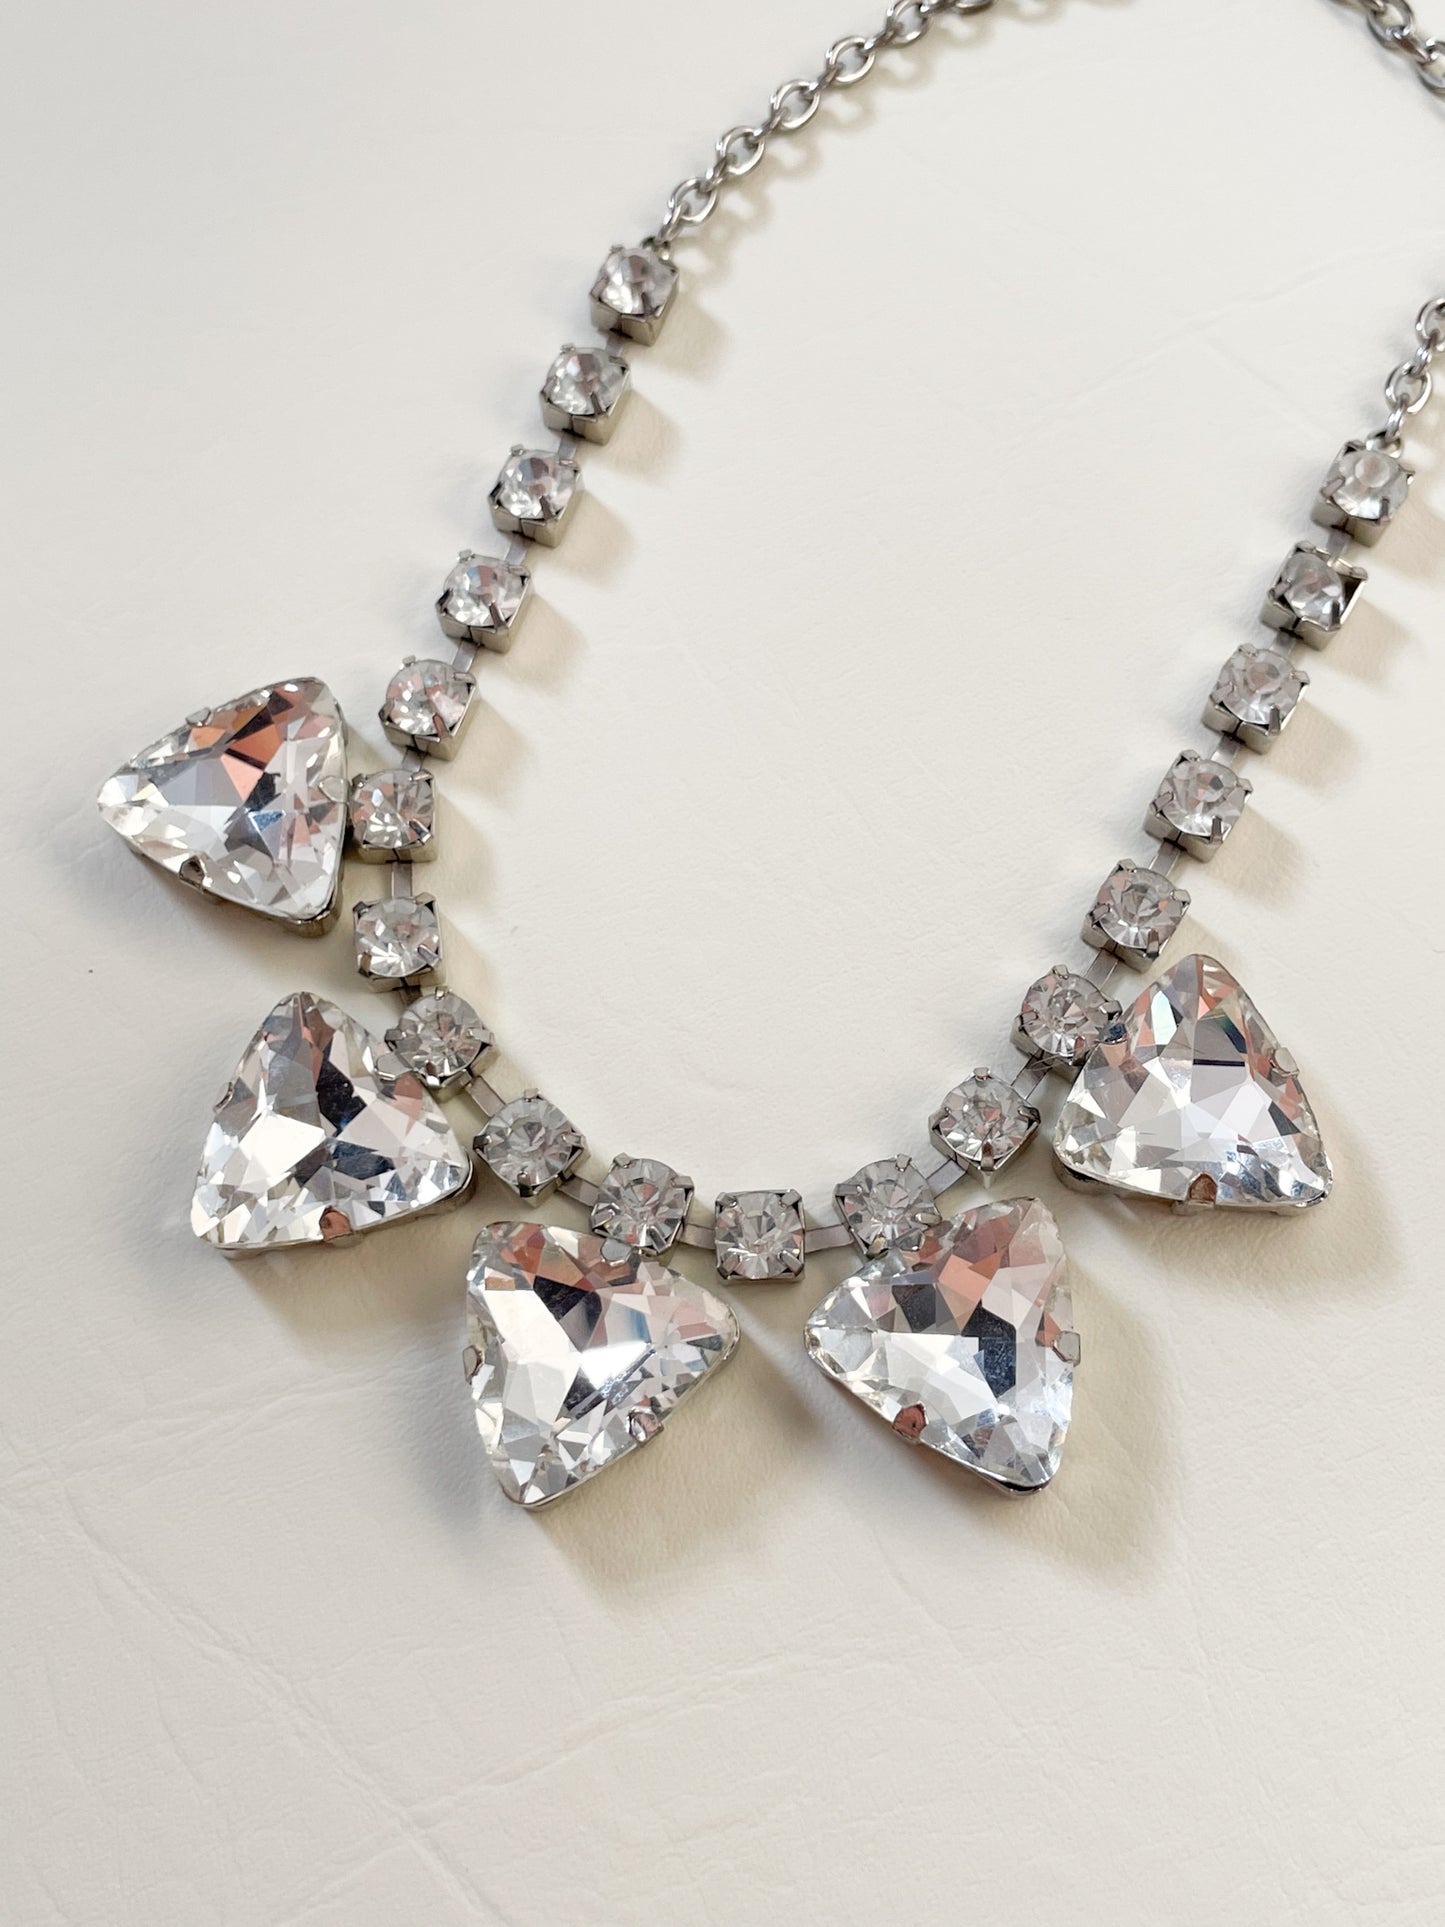 Crystal Sparkly Statement Necklace